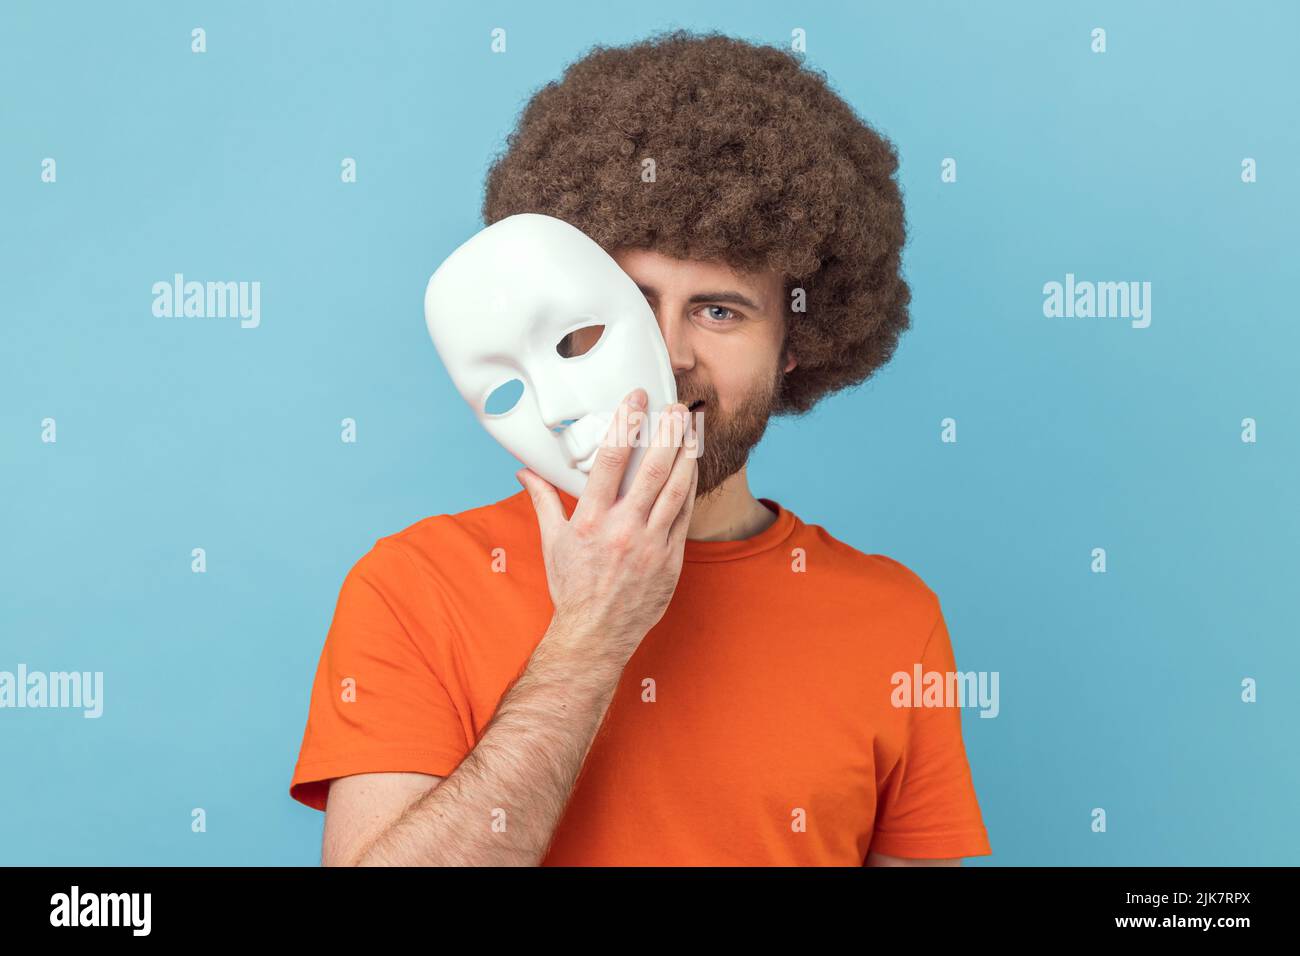 Portrait of man with Afro hairstyle wearing orange T-shirt peeping out white face mask, hiding his real feelings, pretending to be another person. Indoor studio shot isolated on blue background. Stock Photo